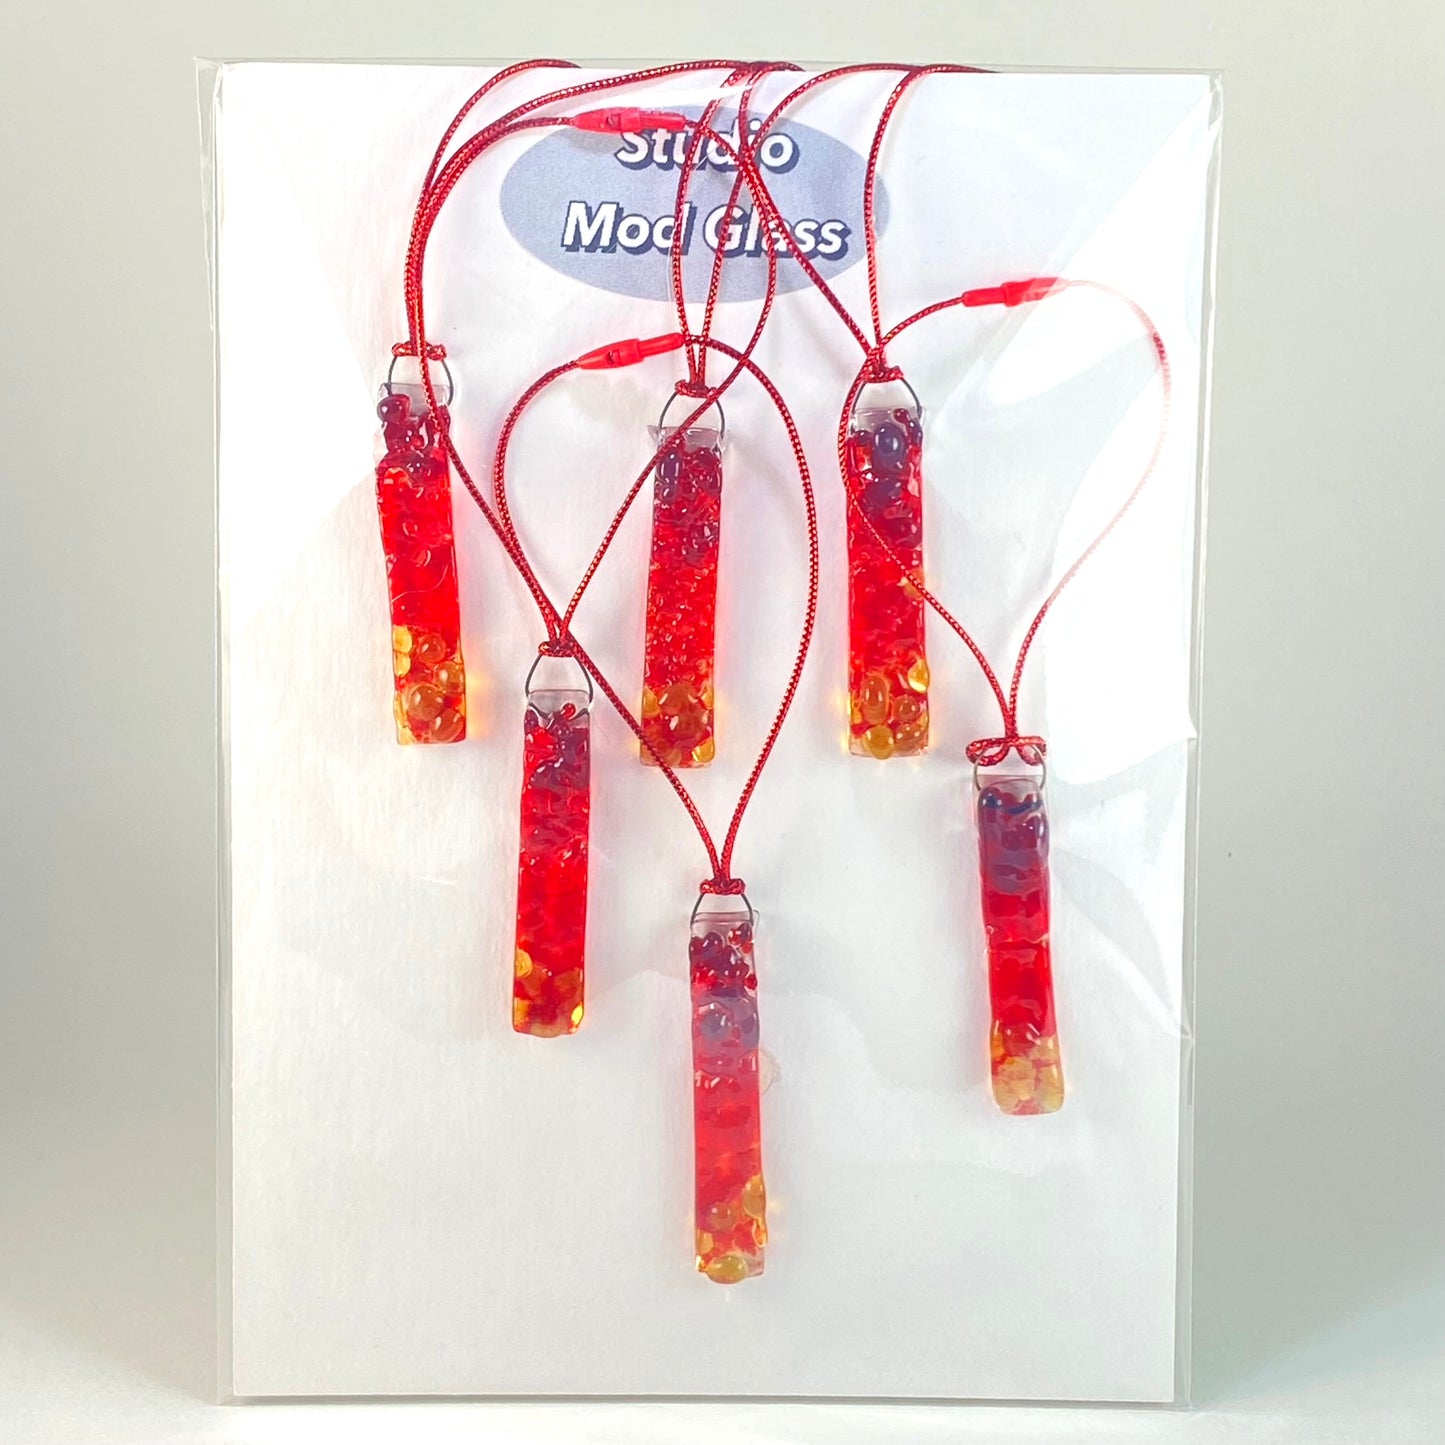 Six (6) Frit RECTANGLE Ornaments in Red & Amber